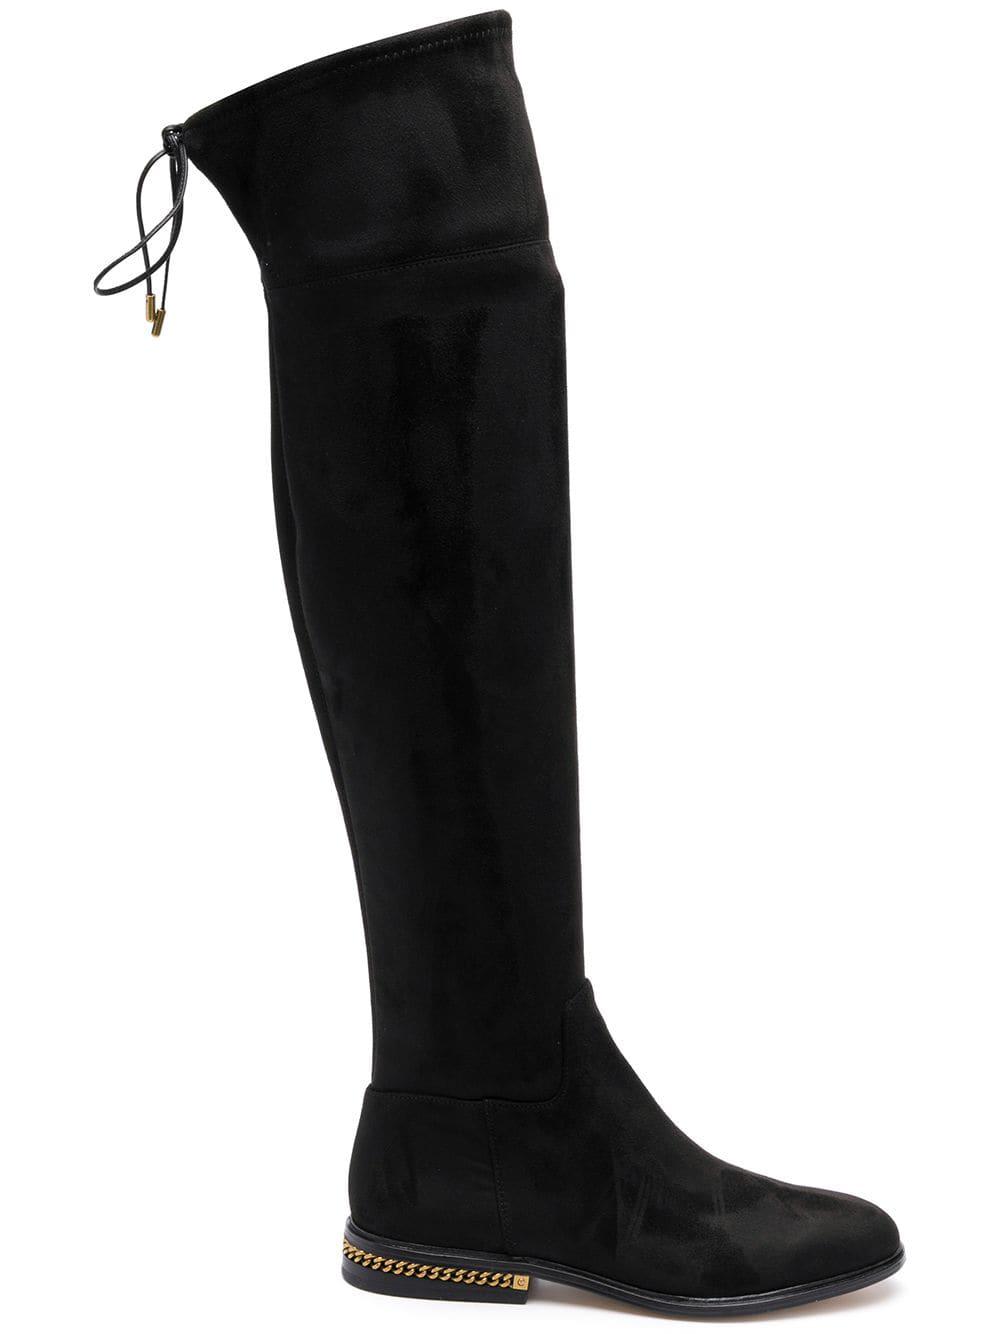 MICHAEL Michael Kors Synthetic Chain High Boots in Black - Lyst